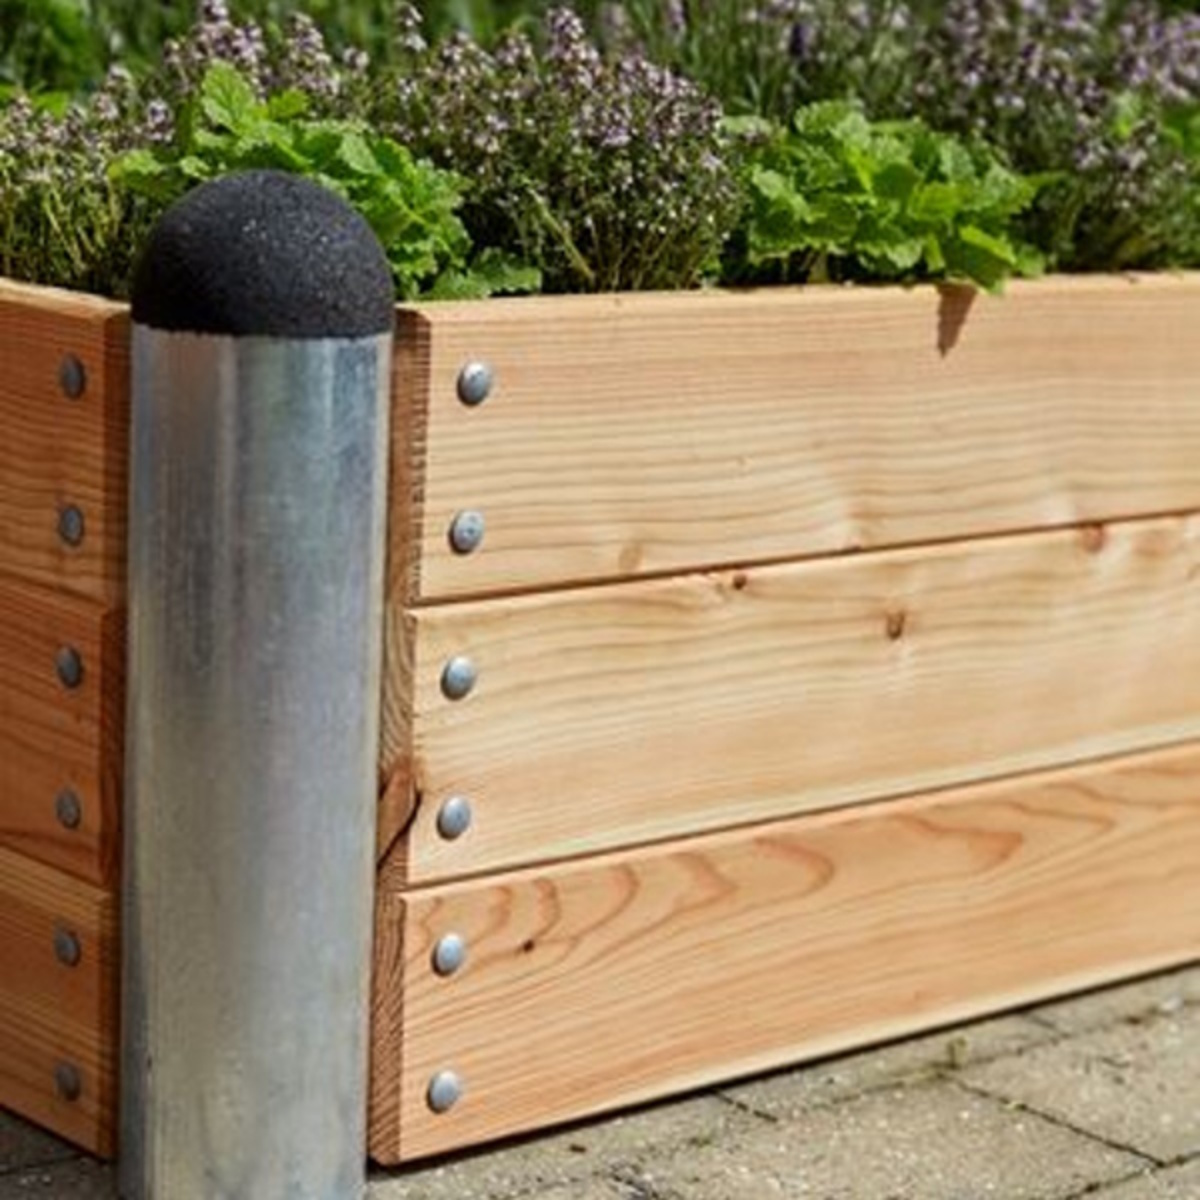 HENRIK BOE raised planter boxes, configurable in any direction